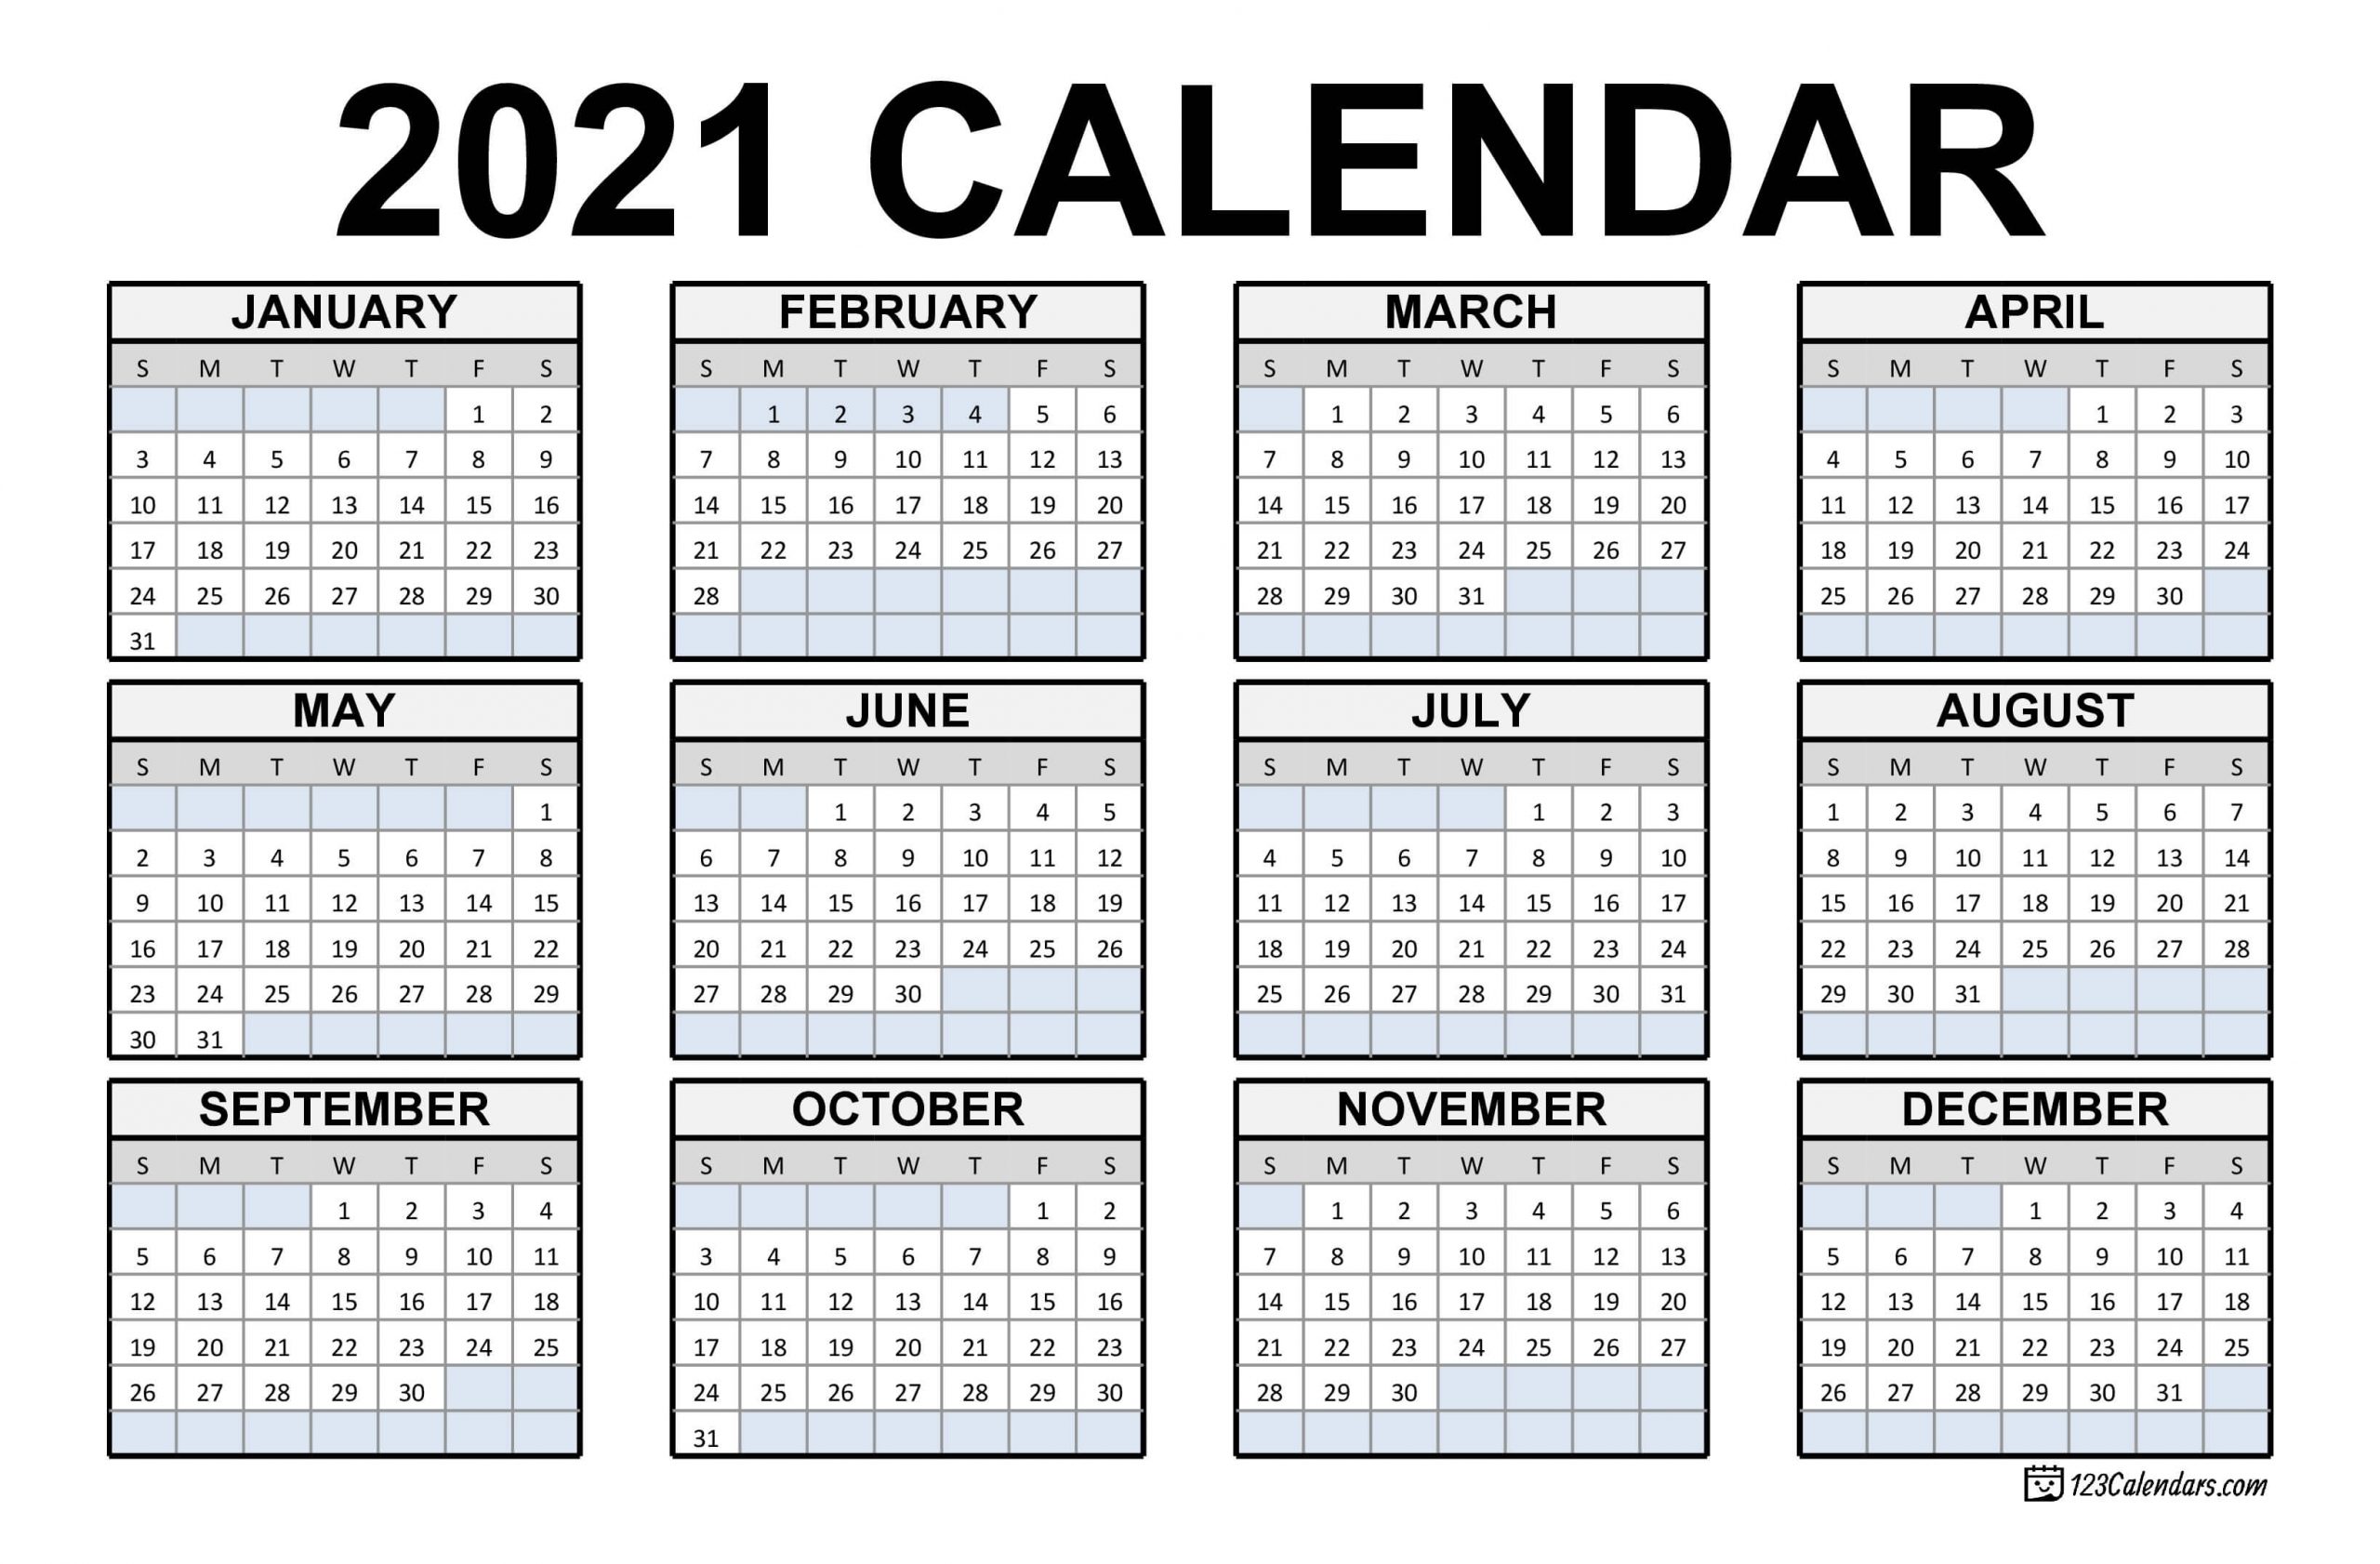 Print Monthly Calendar 2021 With Holidays Lined